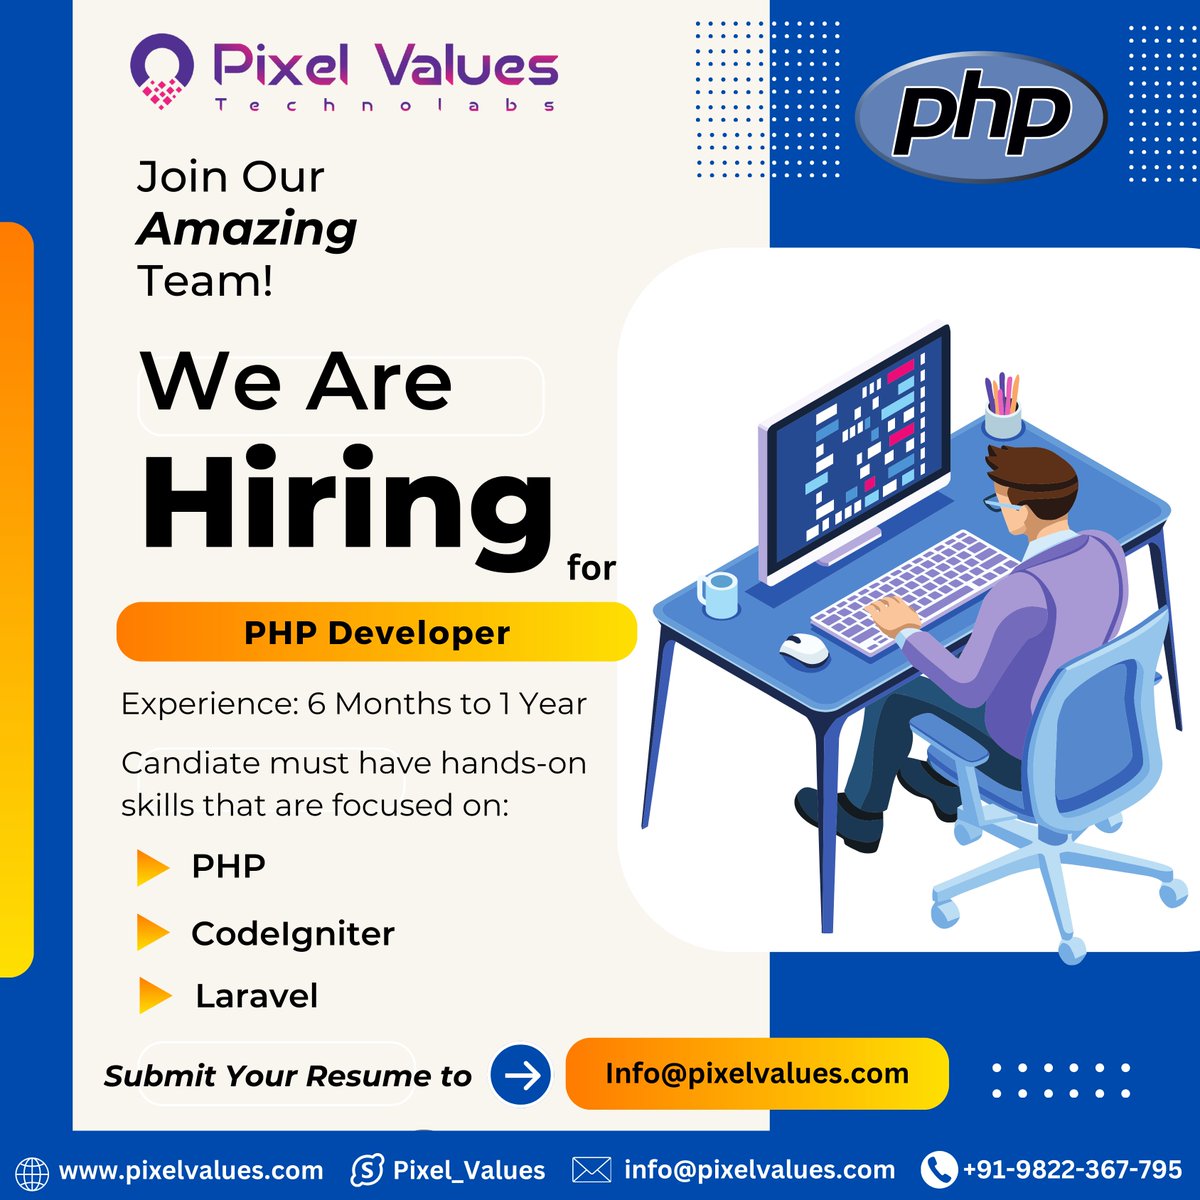 We're on the hunt for a talented #PHPDeveloper to level up our #WebDevelopment game.
Interested candidates shouls send their resumes to 
📩info@pixelvalues.com

#PixelValuesTechnolabs #PixelValues #PHPHiring #PHPDeveloperJobs #WeAreHiring #PHPDevelopers  #PHP